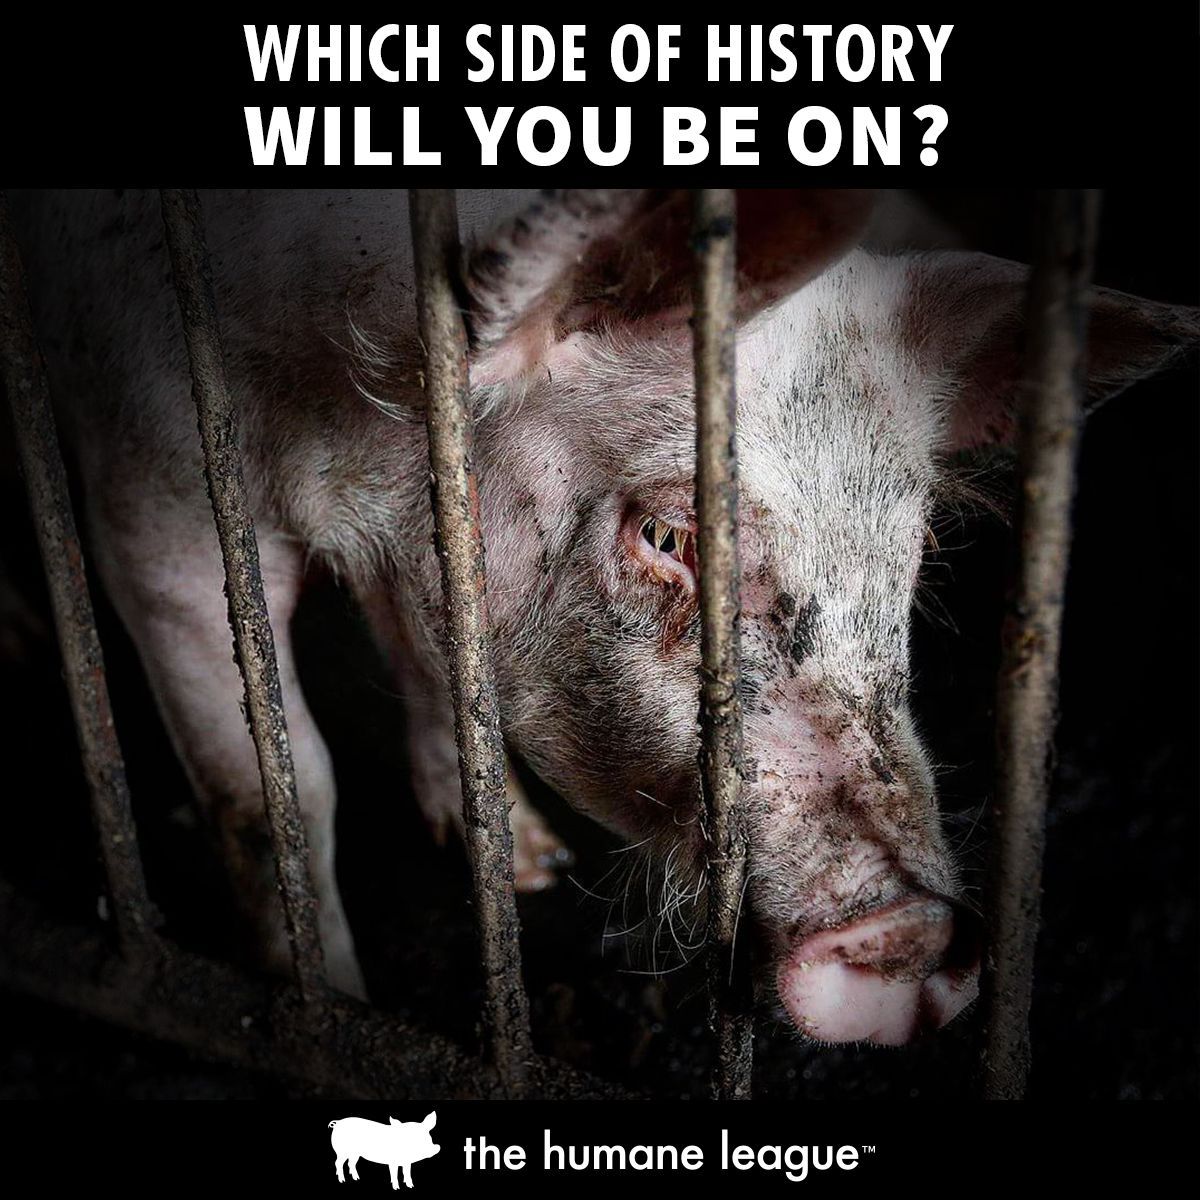 Be on the side of history that ENDS factory farming. #FightForAnimalRights ✊